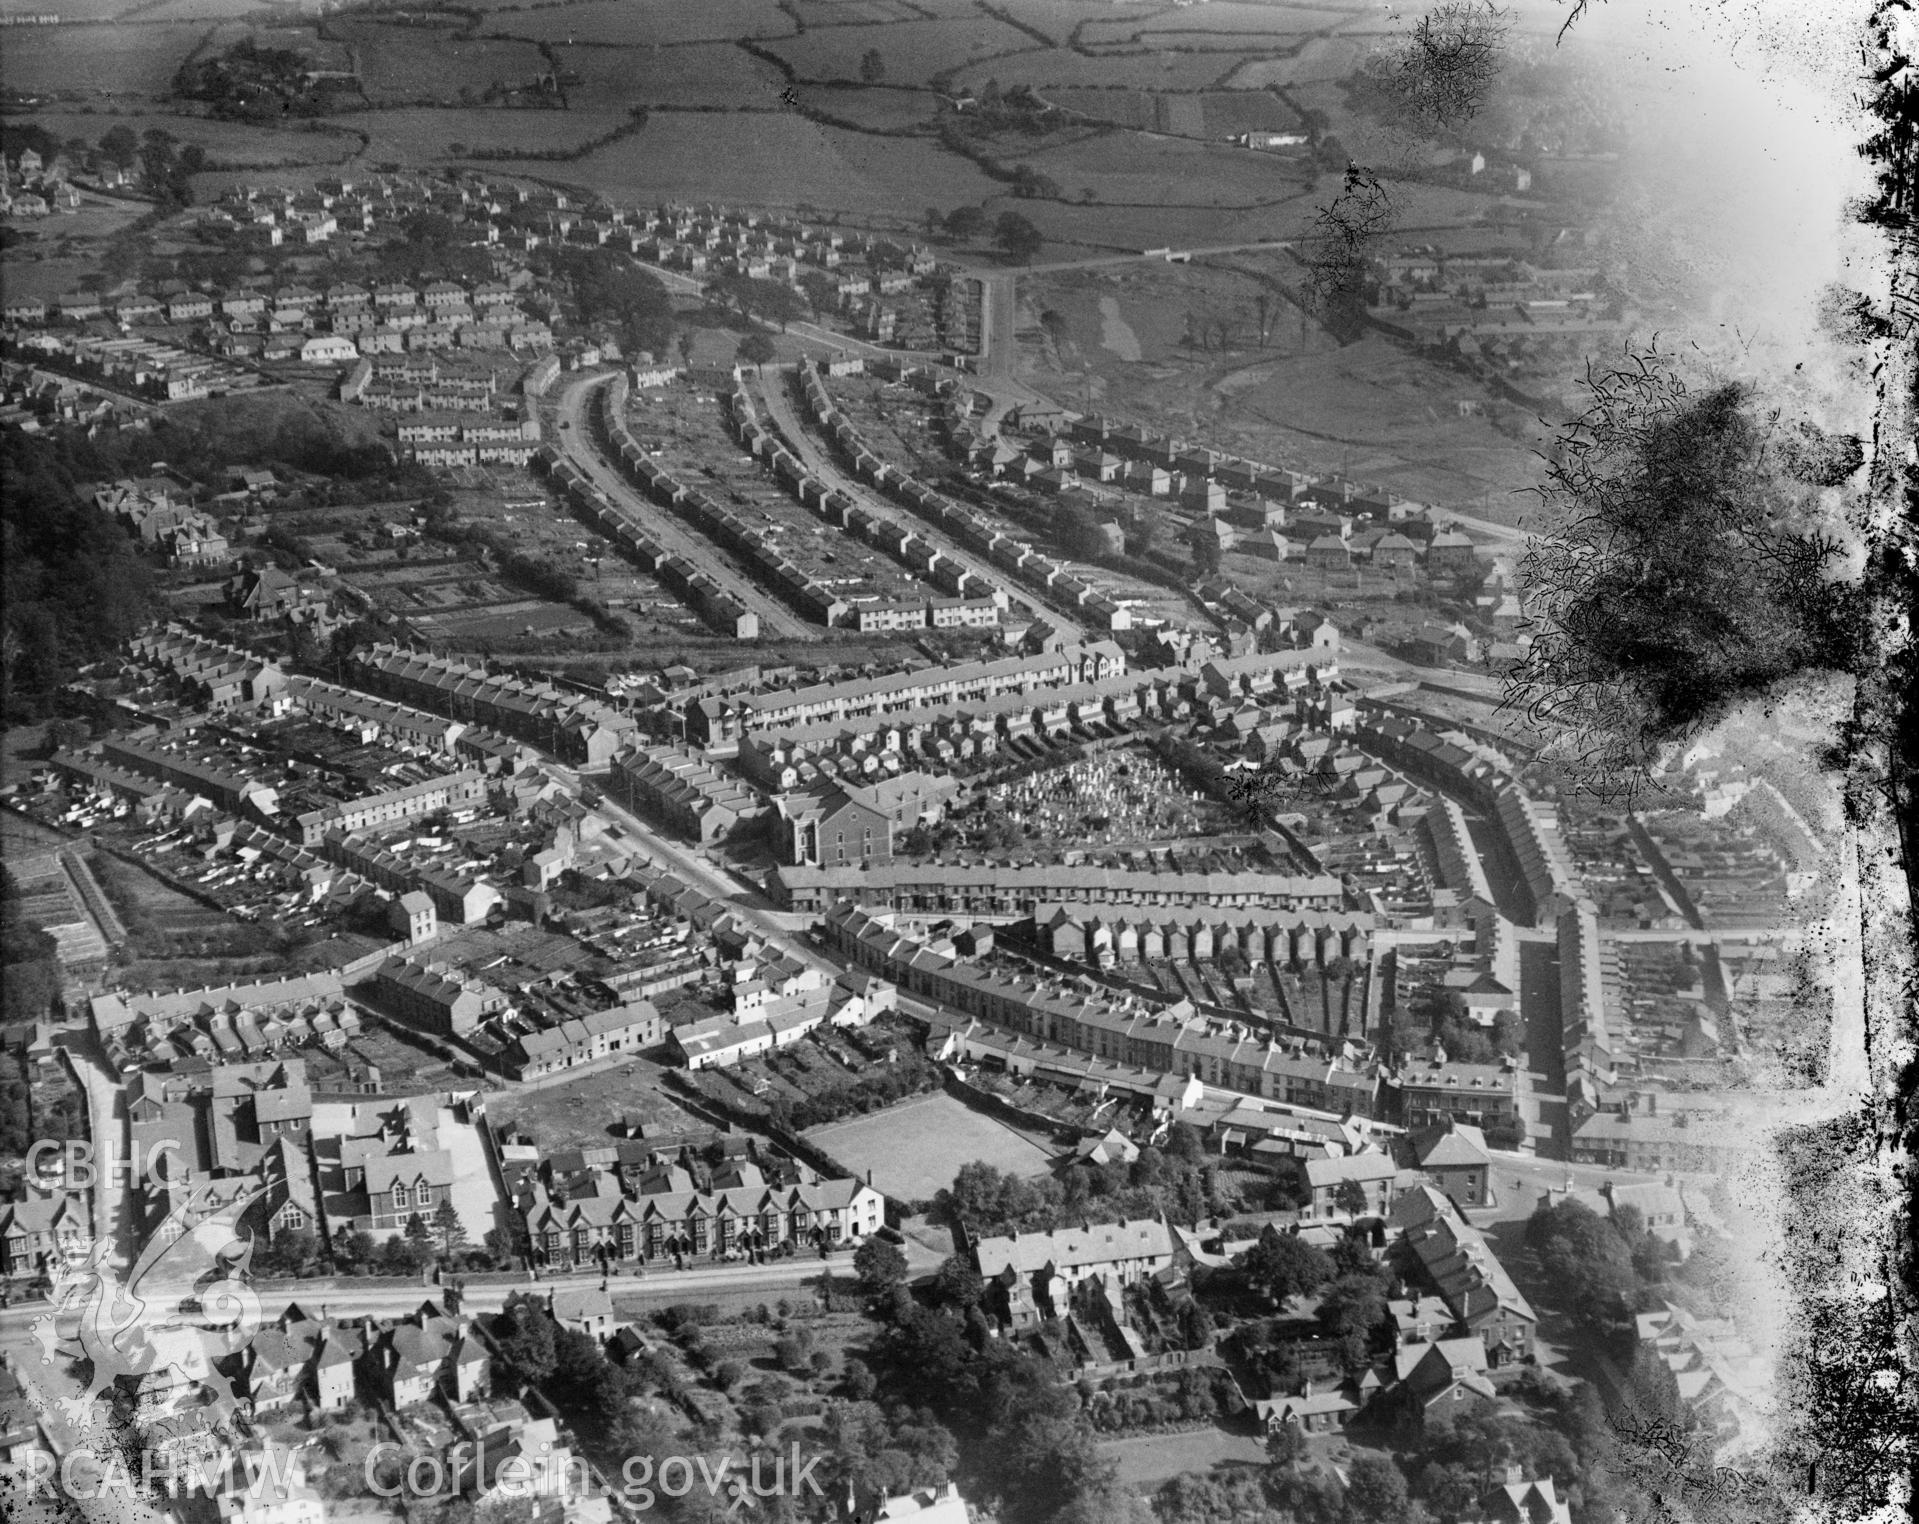 General view of Tyrfran area of Llanelli, oblique aerial view. 5?x4? black and white glass plate negative.